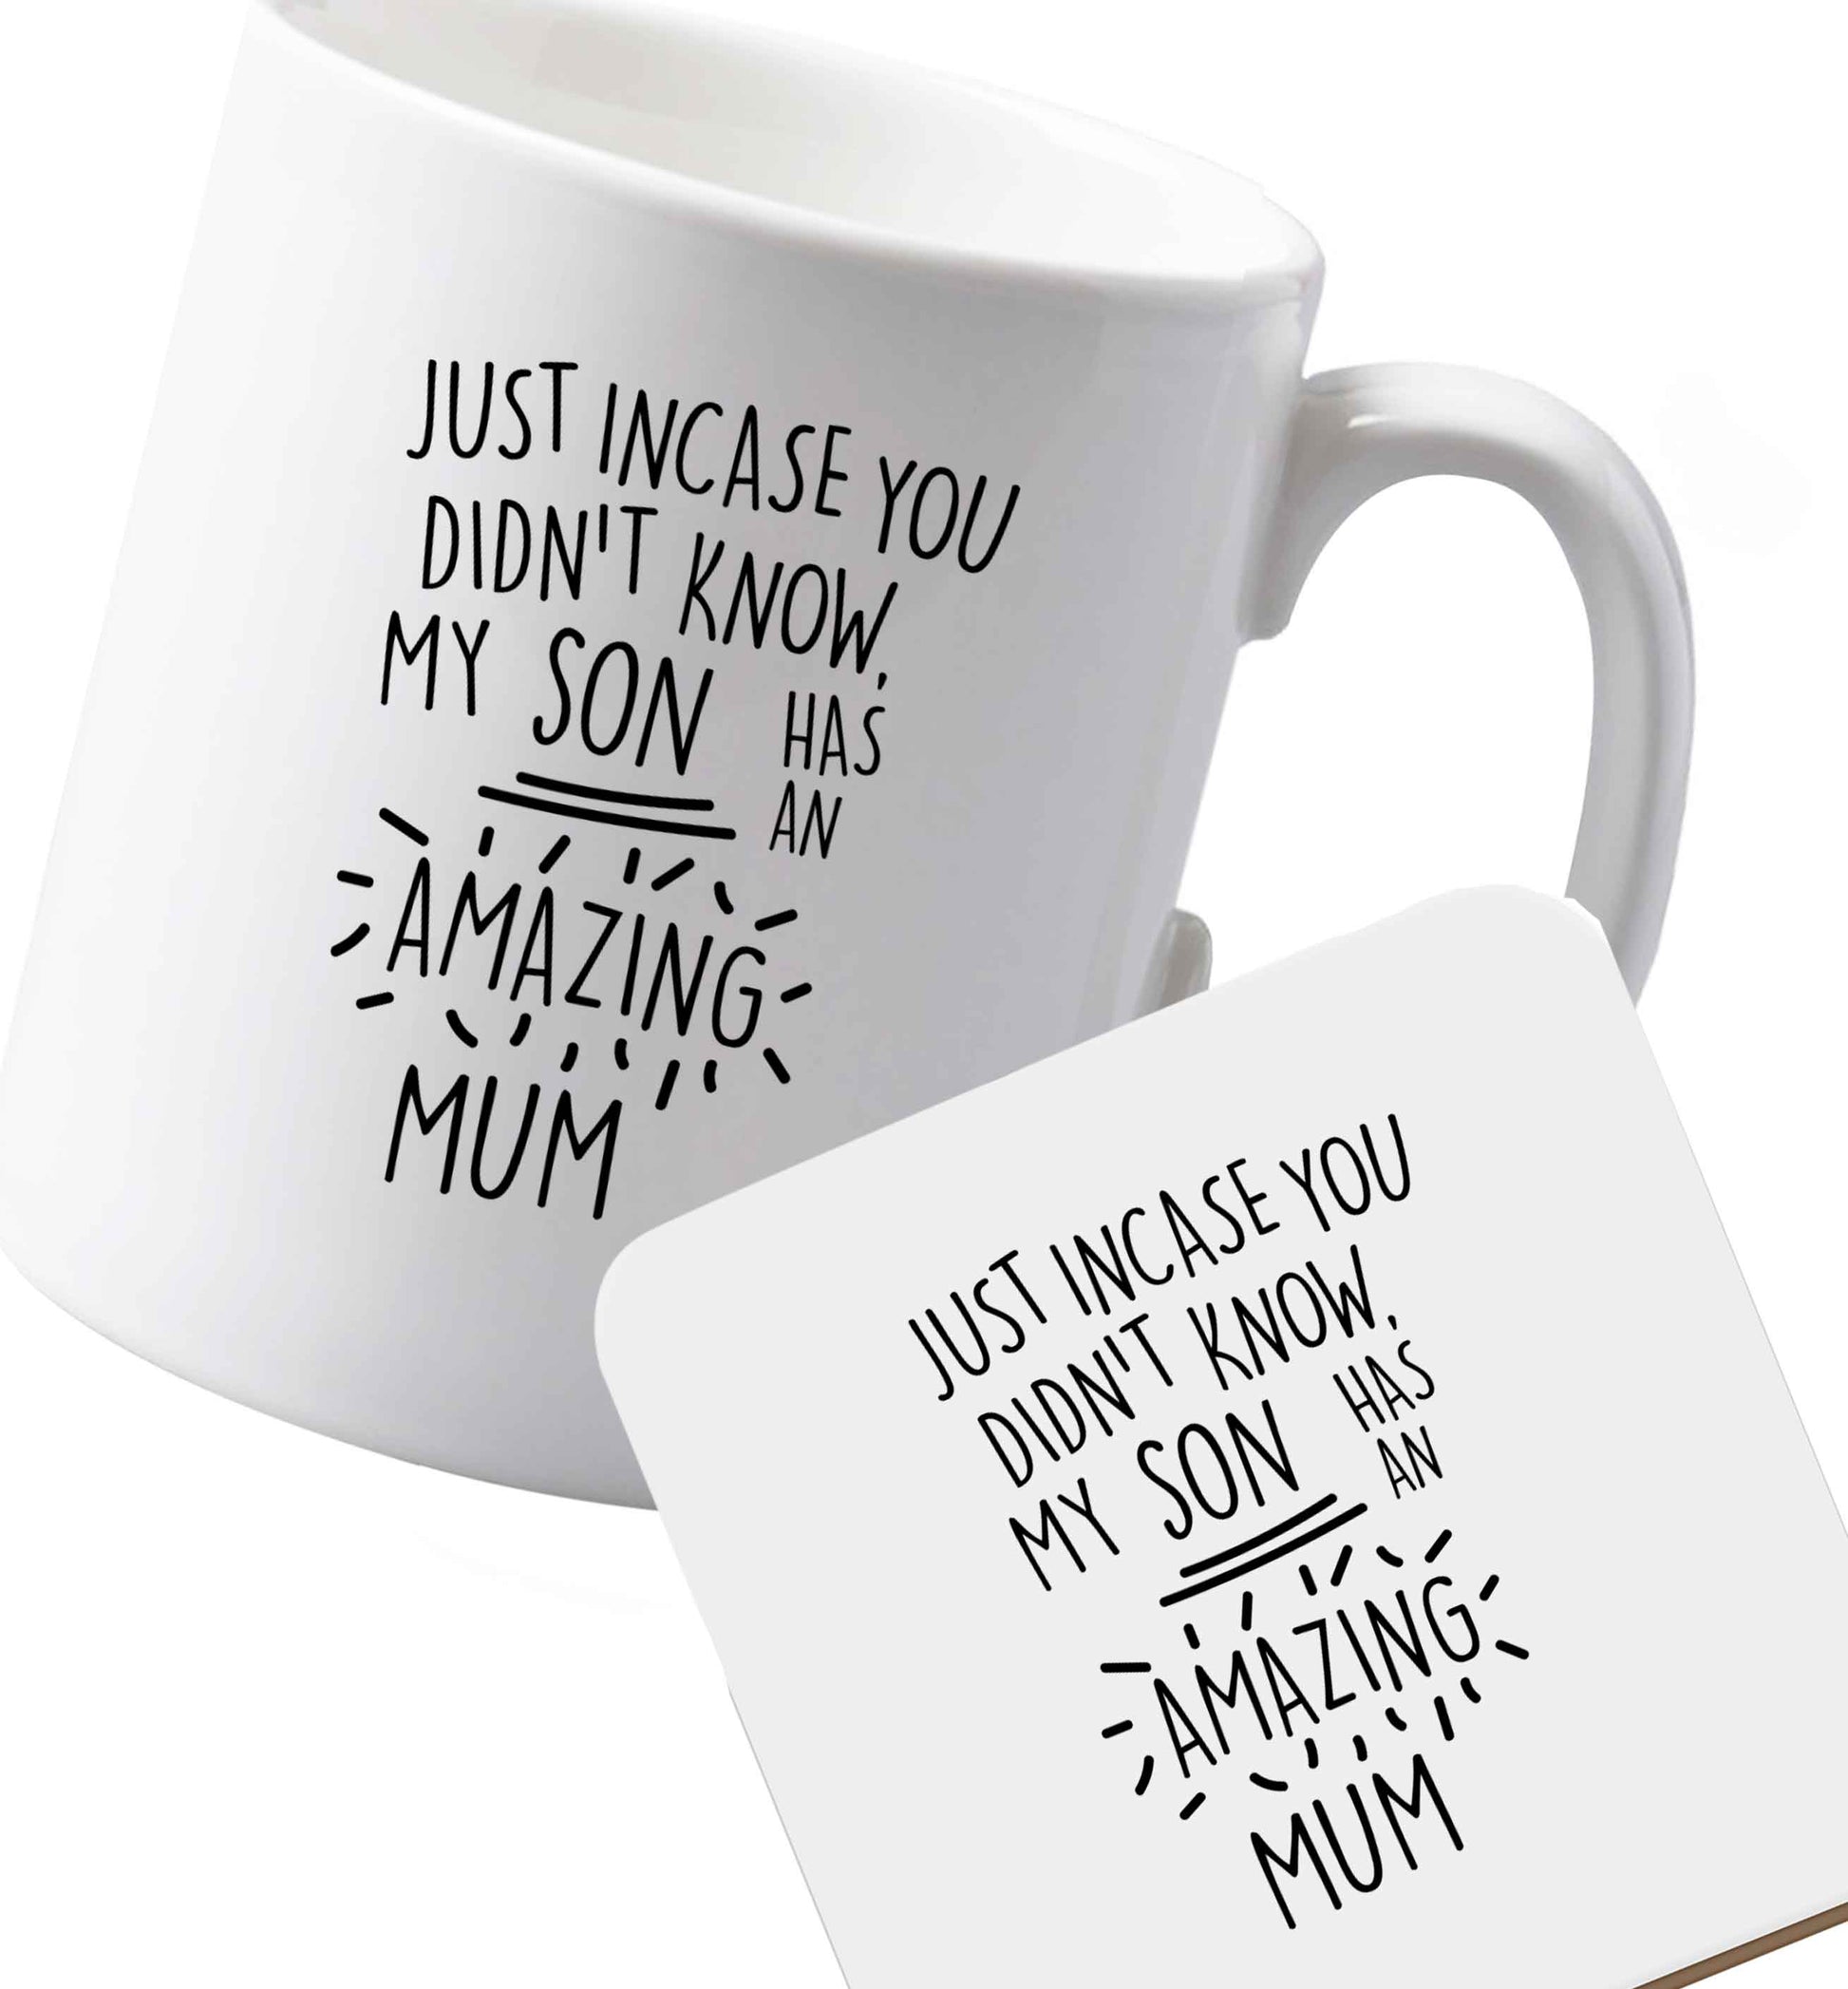 10 oz Ceramic mug and coaster Just incase you didn't know my son has an amazing mum both sides